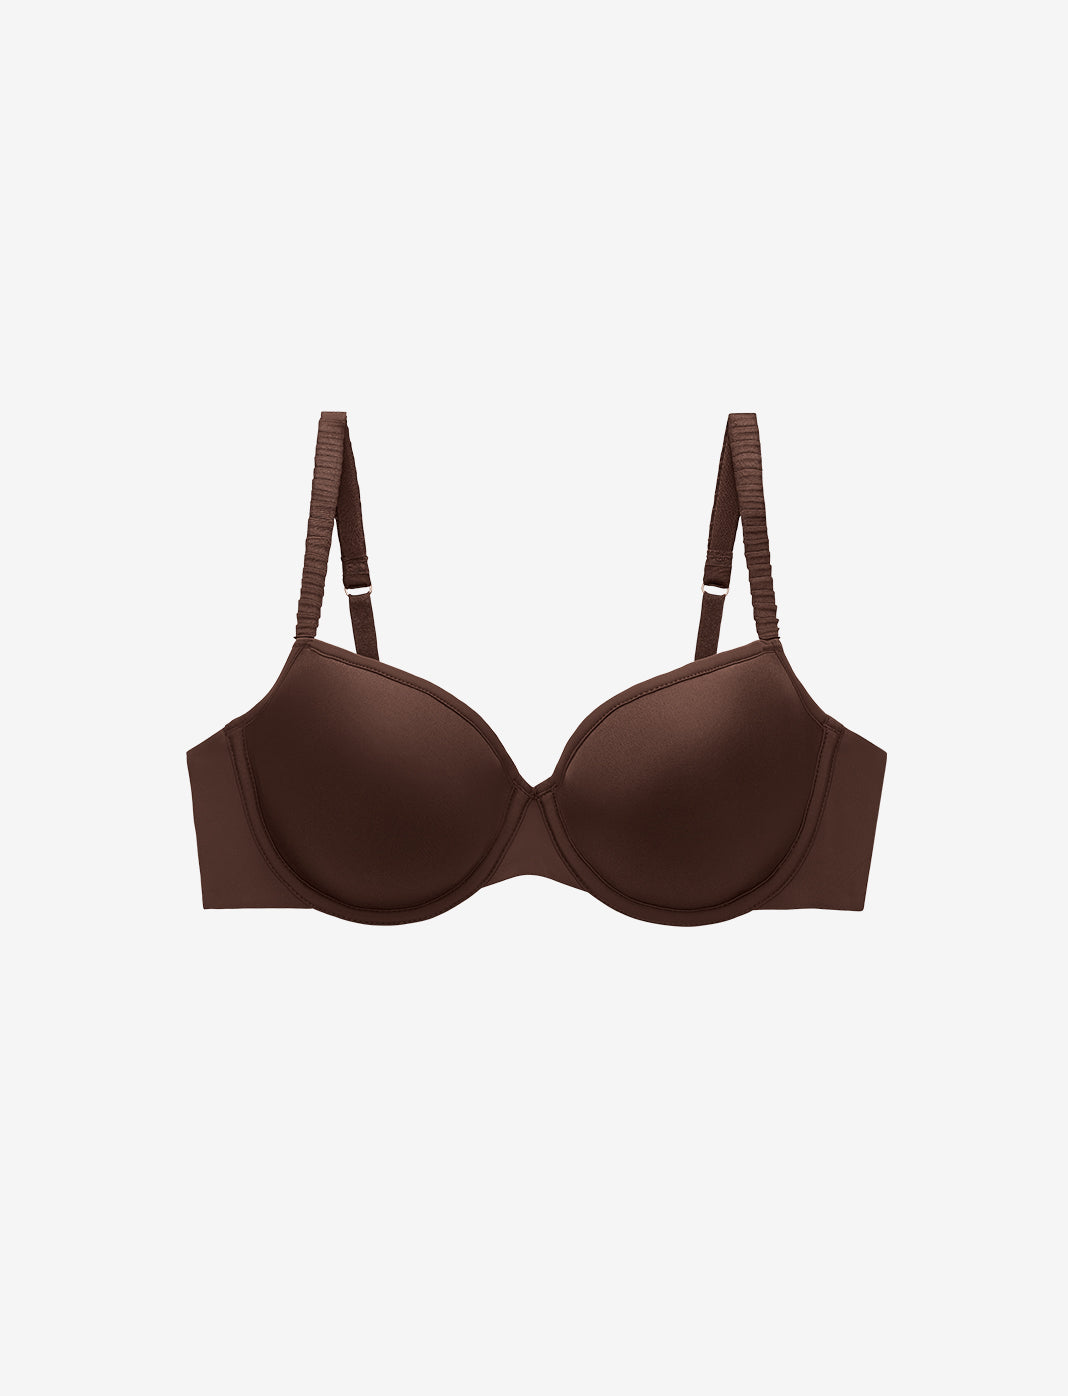 C Cup Bras: Exploring C Cup Boobs, Breasts and Bra Size - HauteFlair